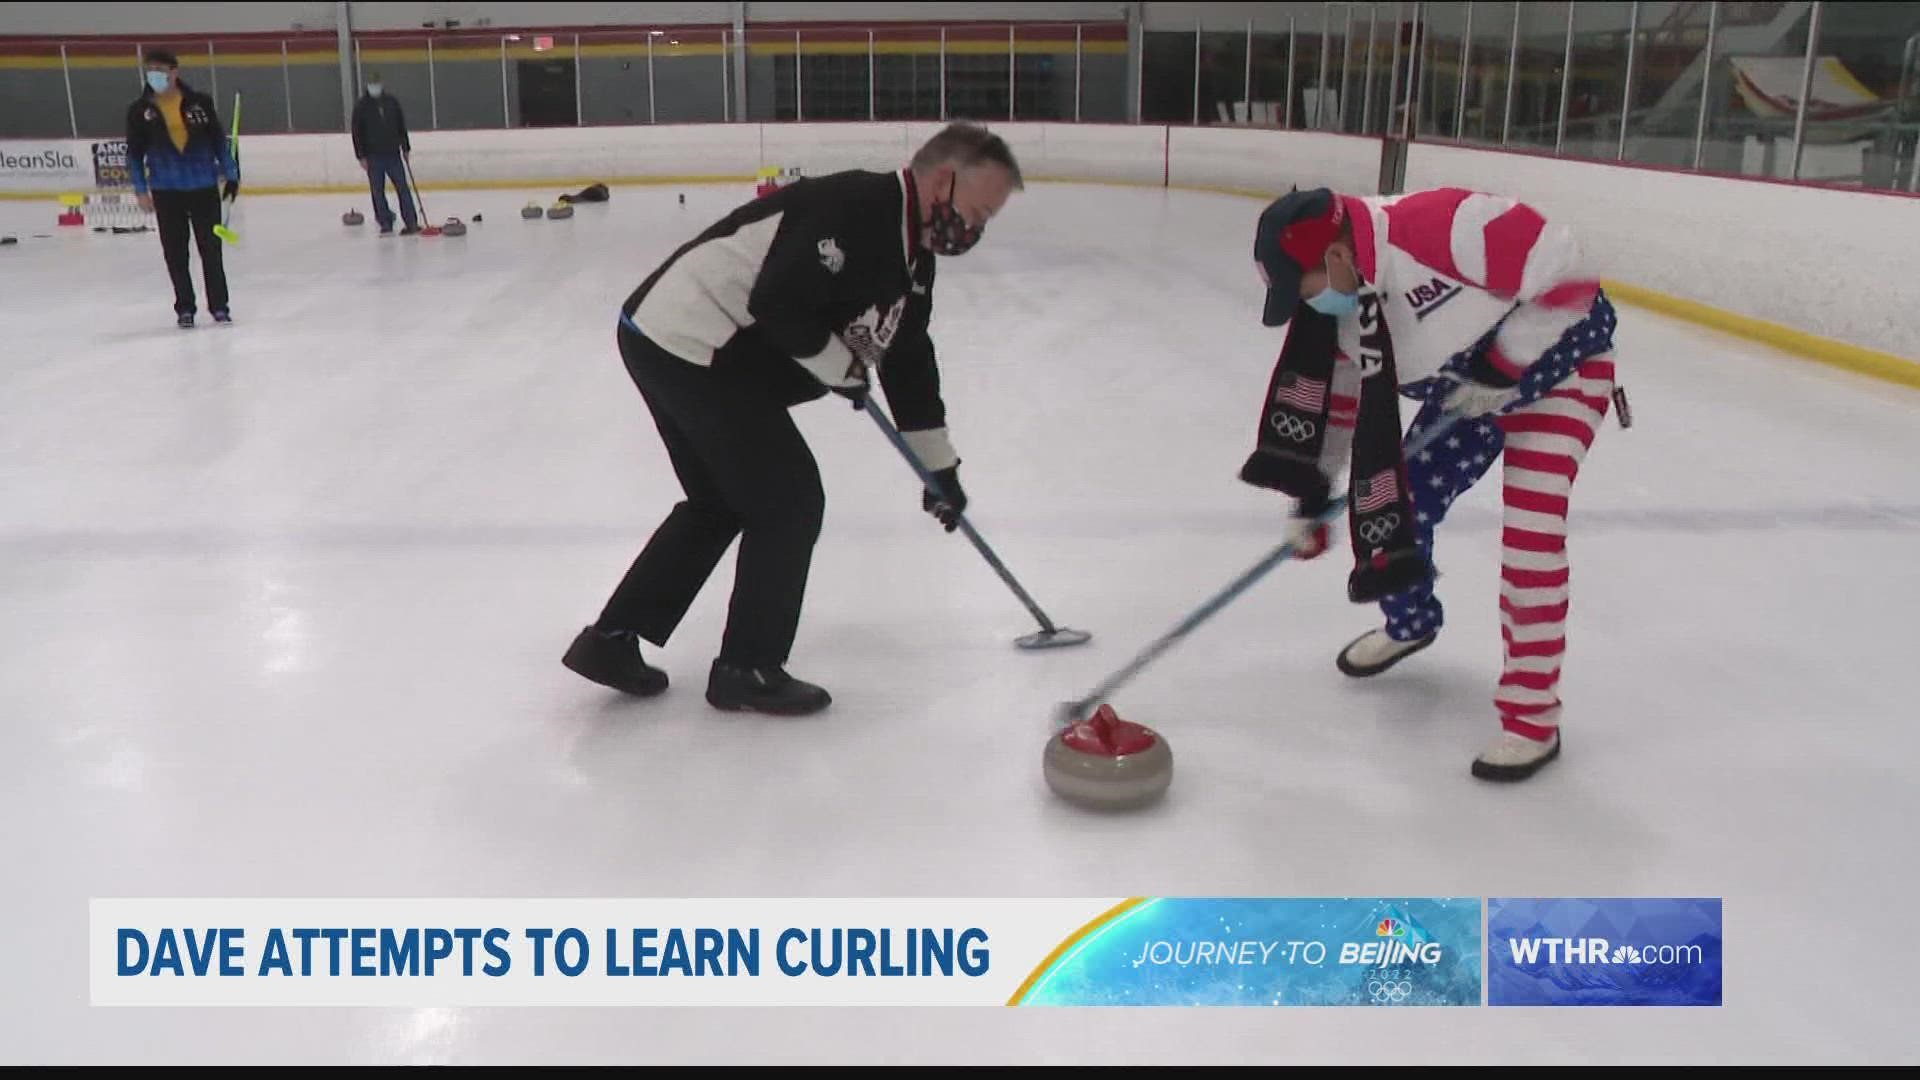 As we found out in a visit to the Circle City Curling Club, it's not as easy as it looks.